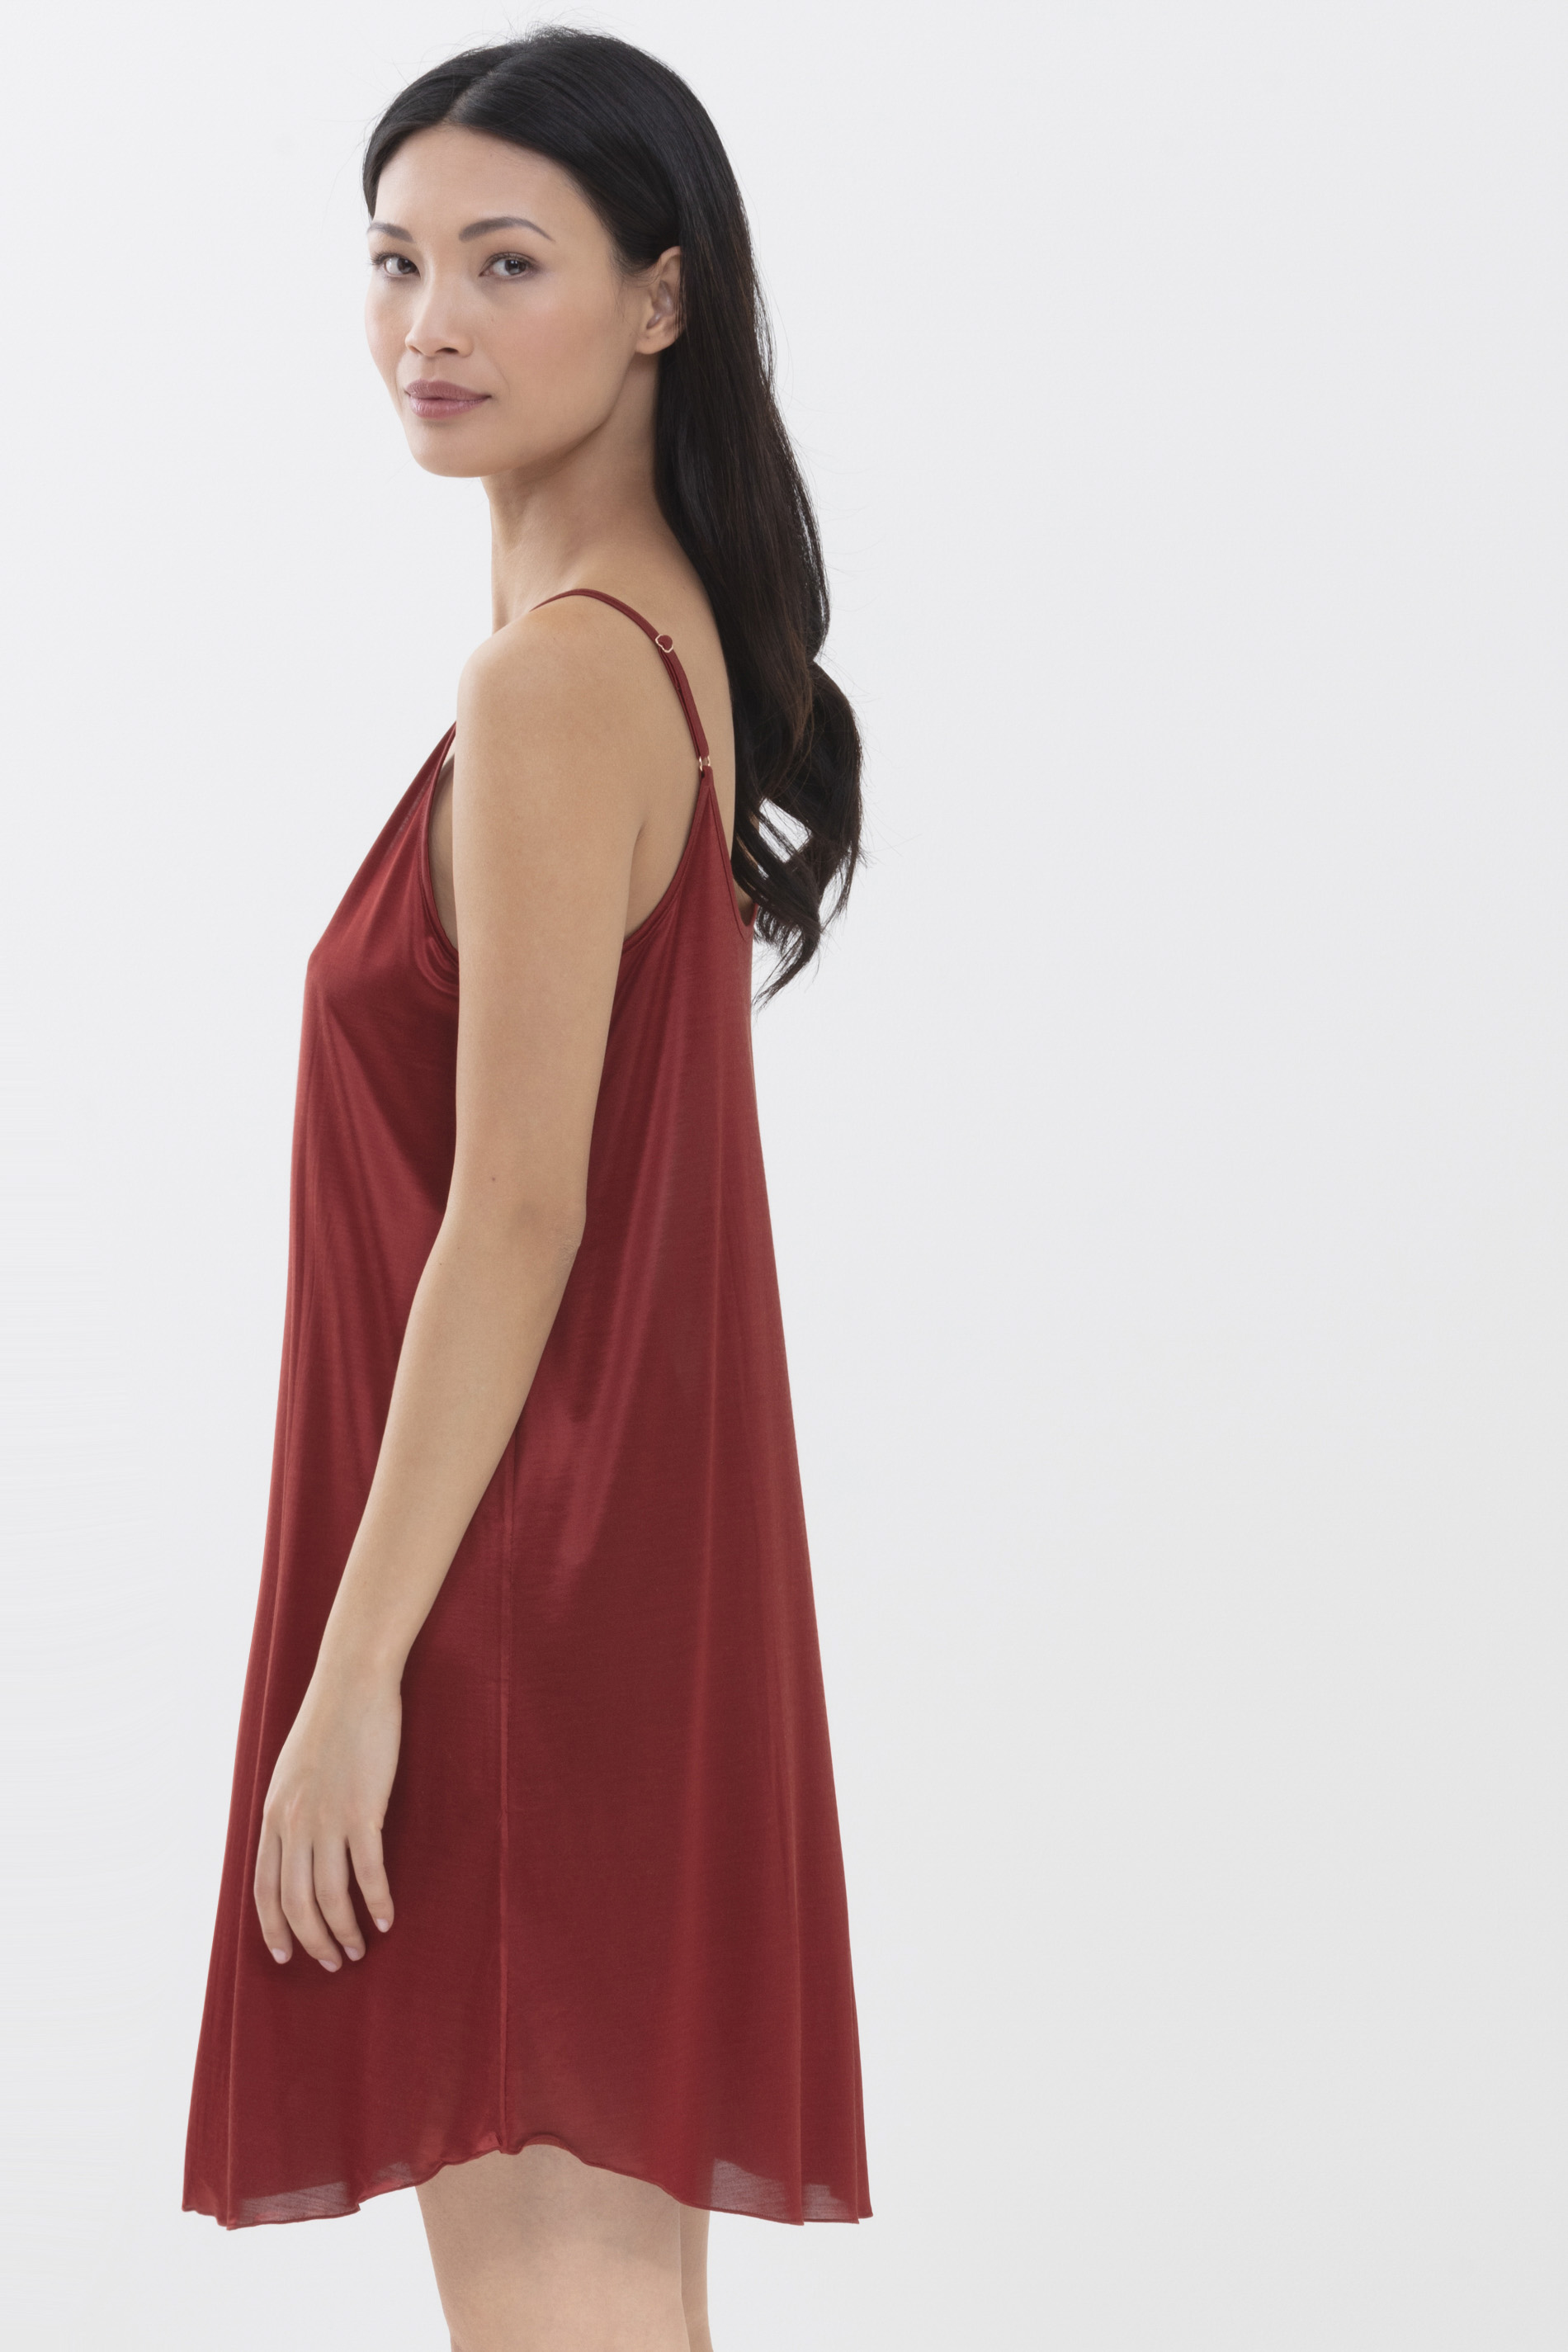 Negligee Red Pepper Serie Coco Detail View 02 | mey®